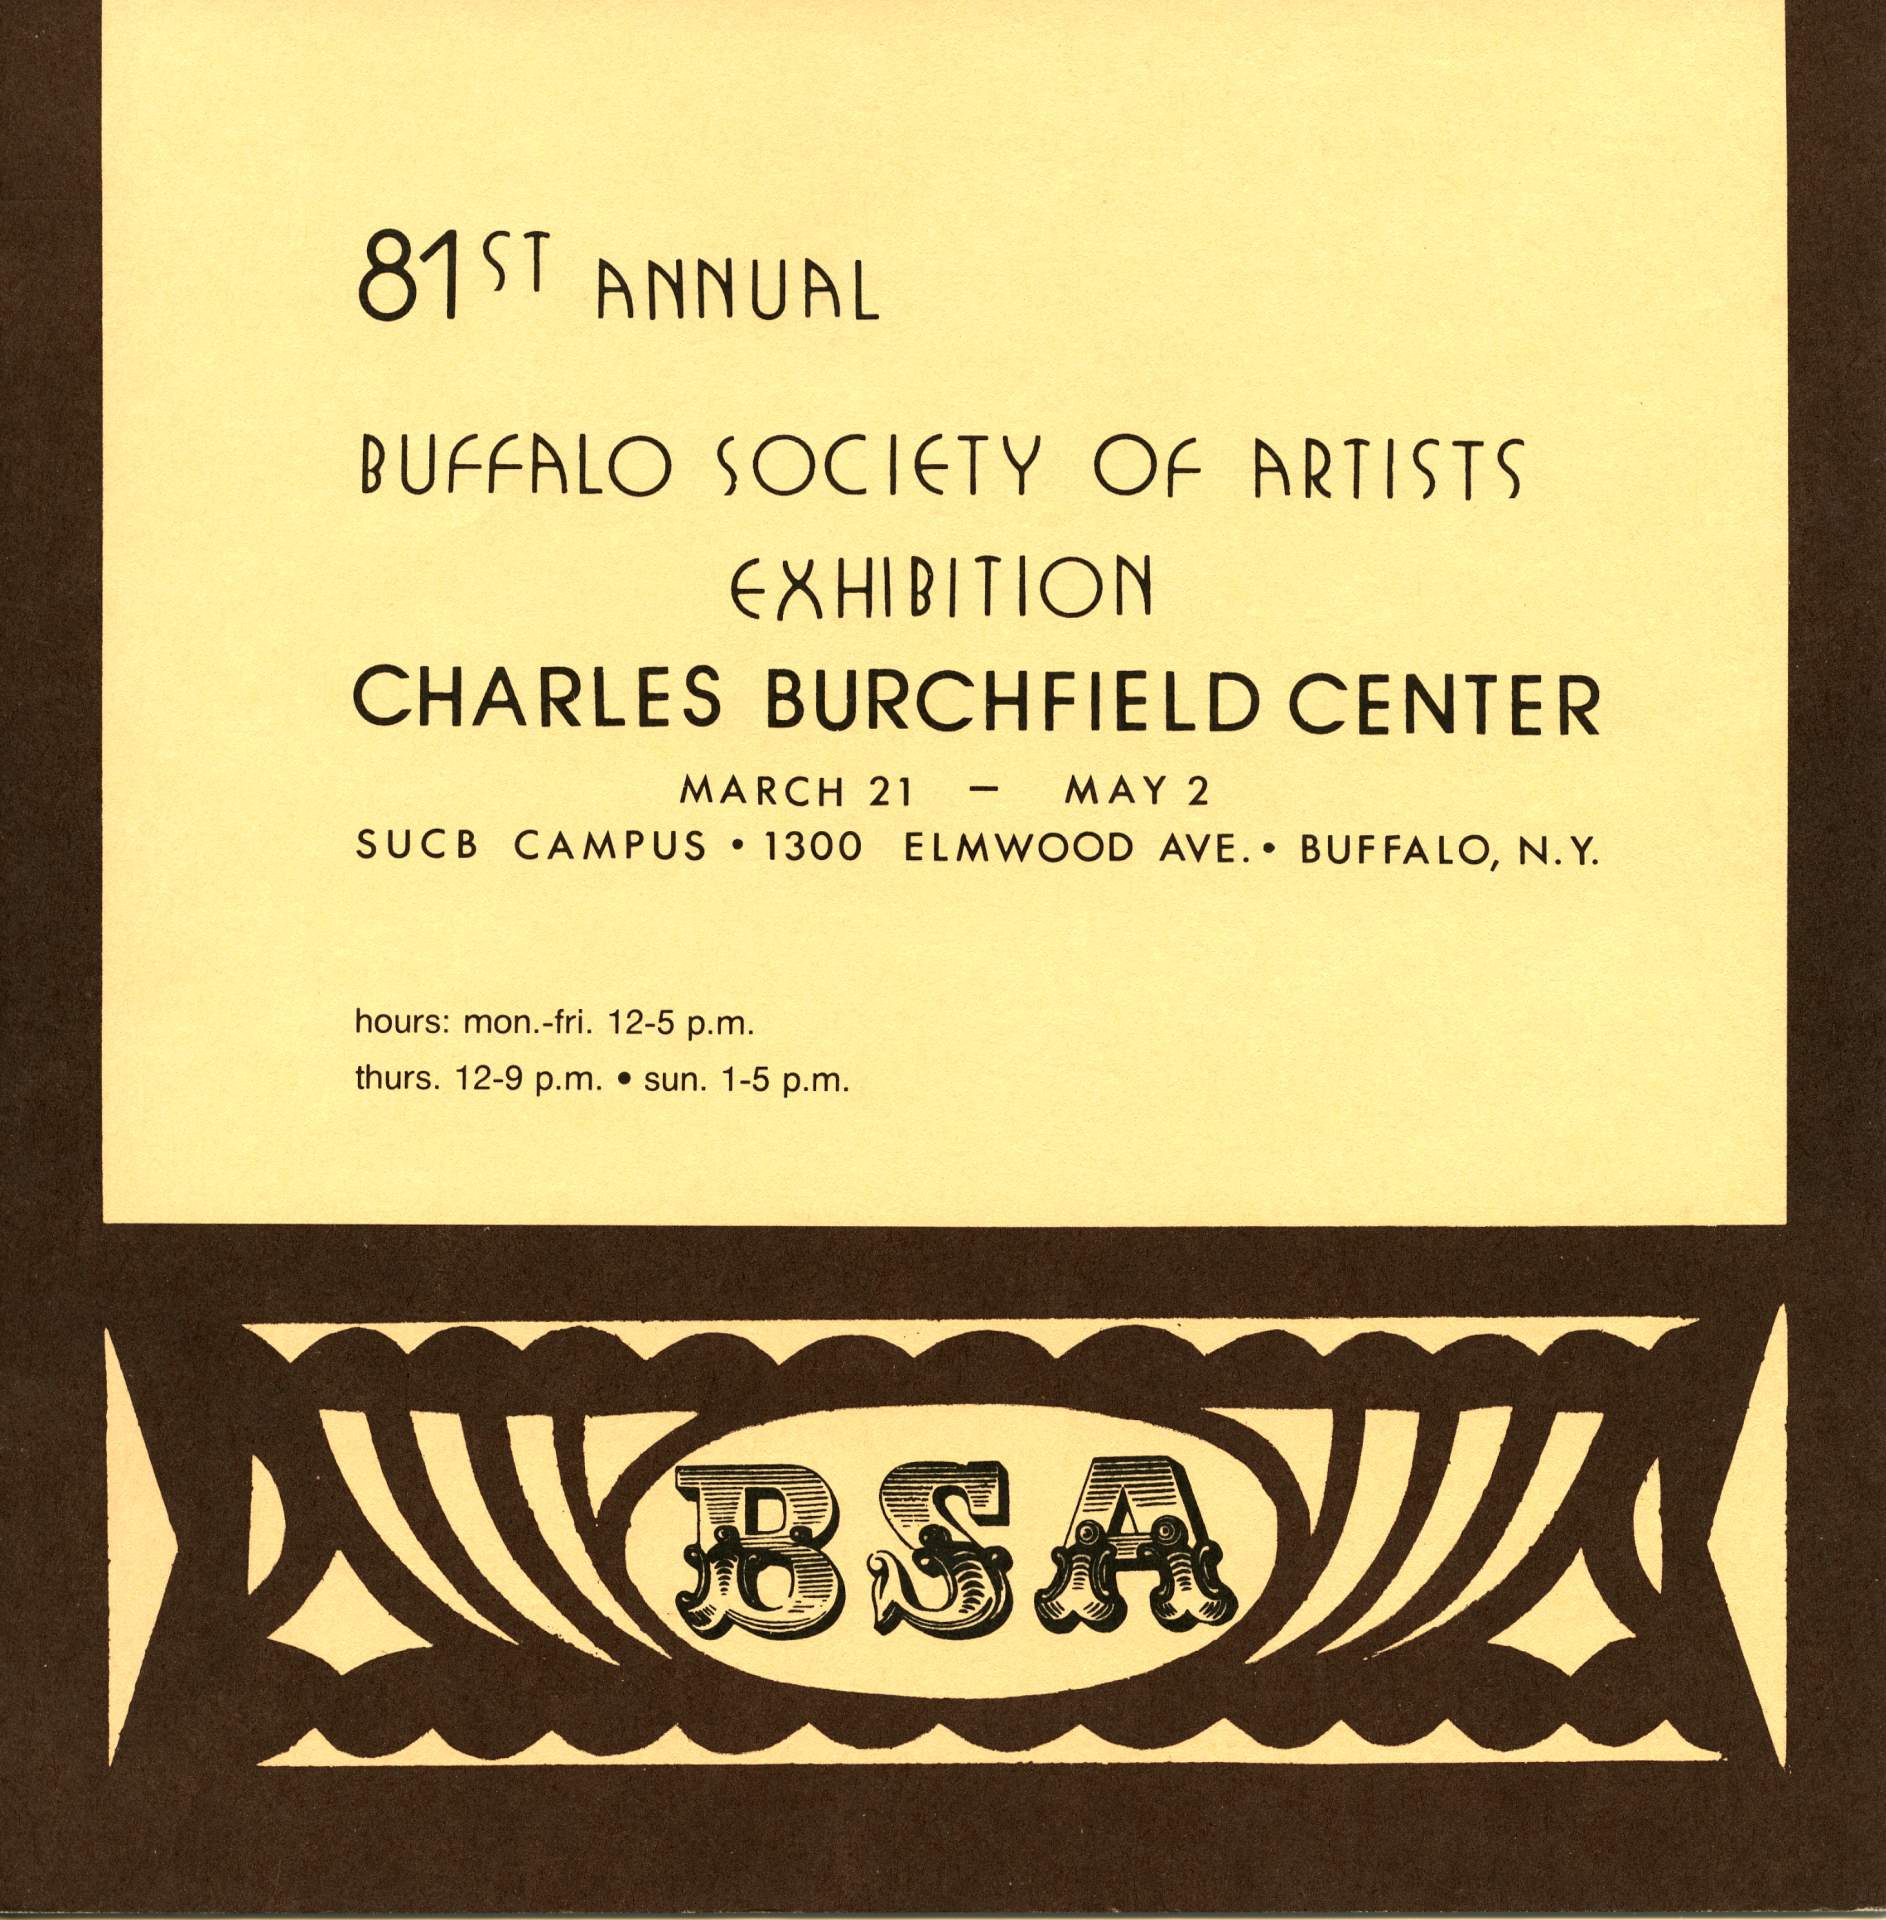 81st Annual Buffalo Society of Artists Exhibition